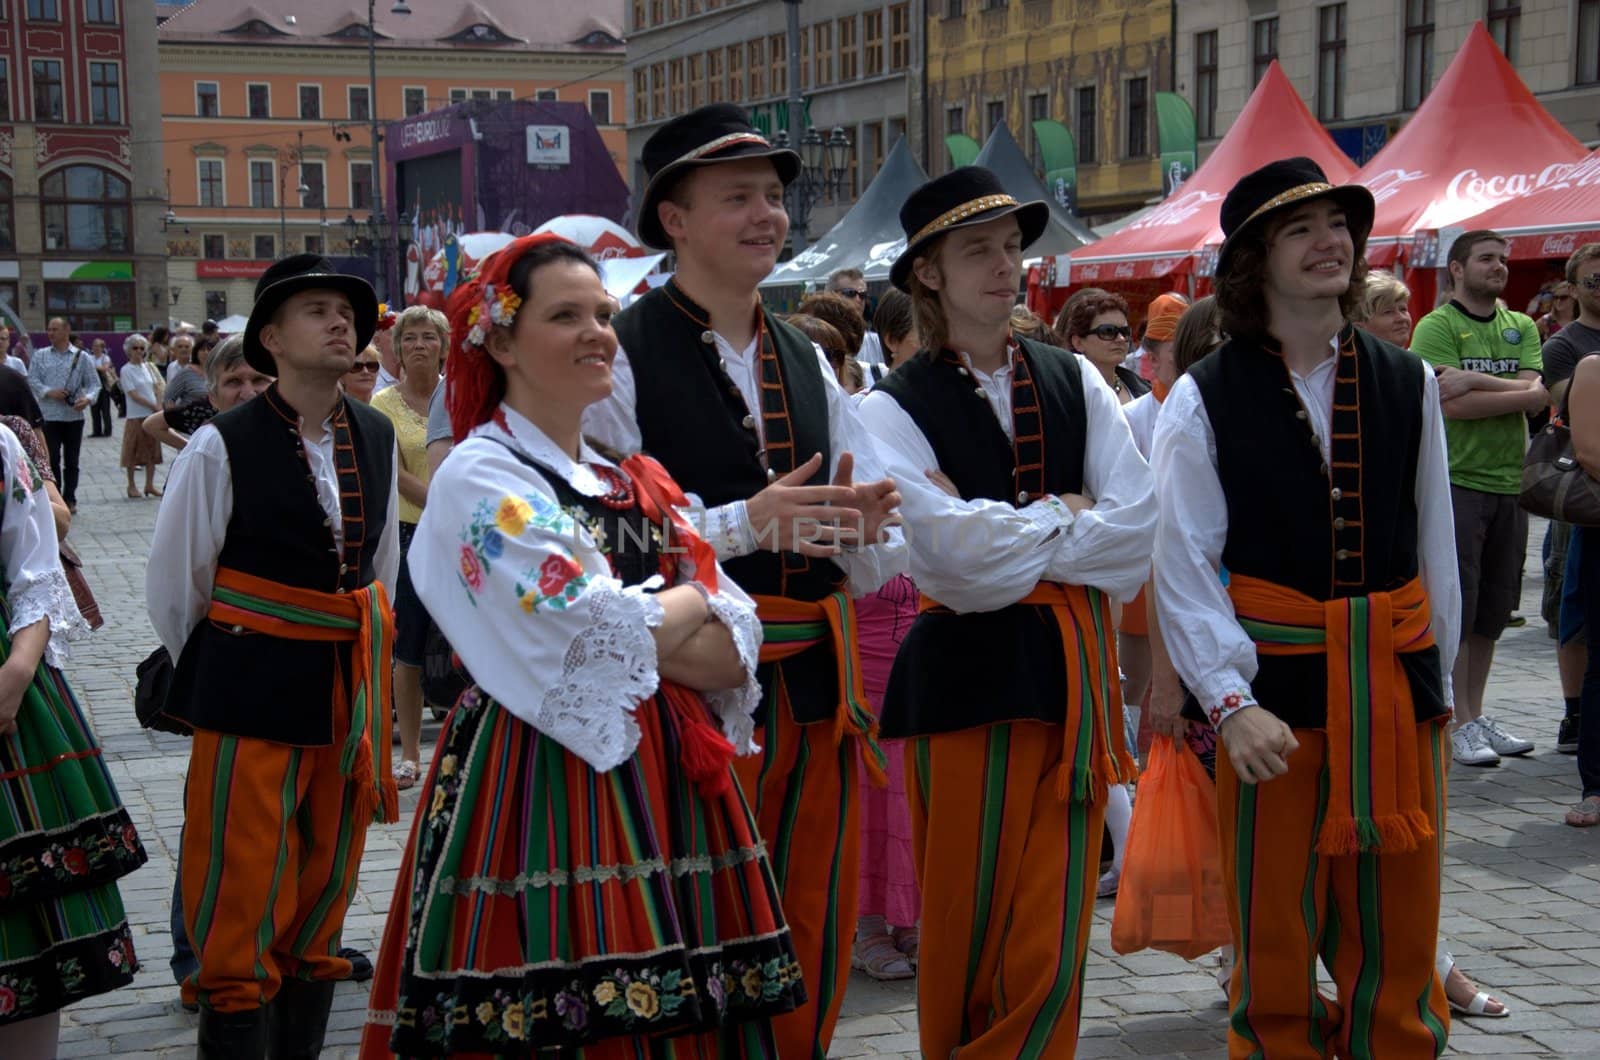 WROCLAW, POLAND - JUNE 15:  Members of Folk Dance group "Wroclaw" visit Euro 2012 fanzone on June 15, 2012 in Wroclaw.  